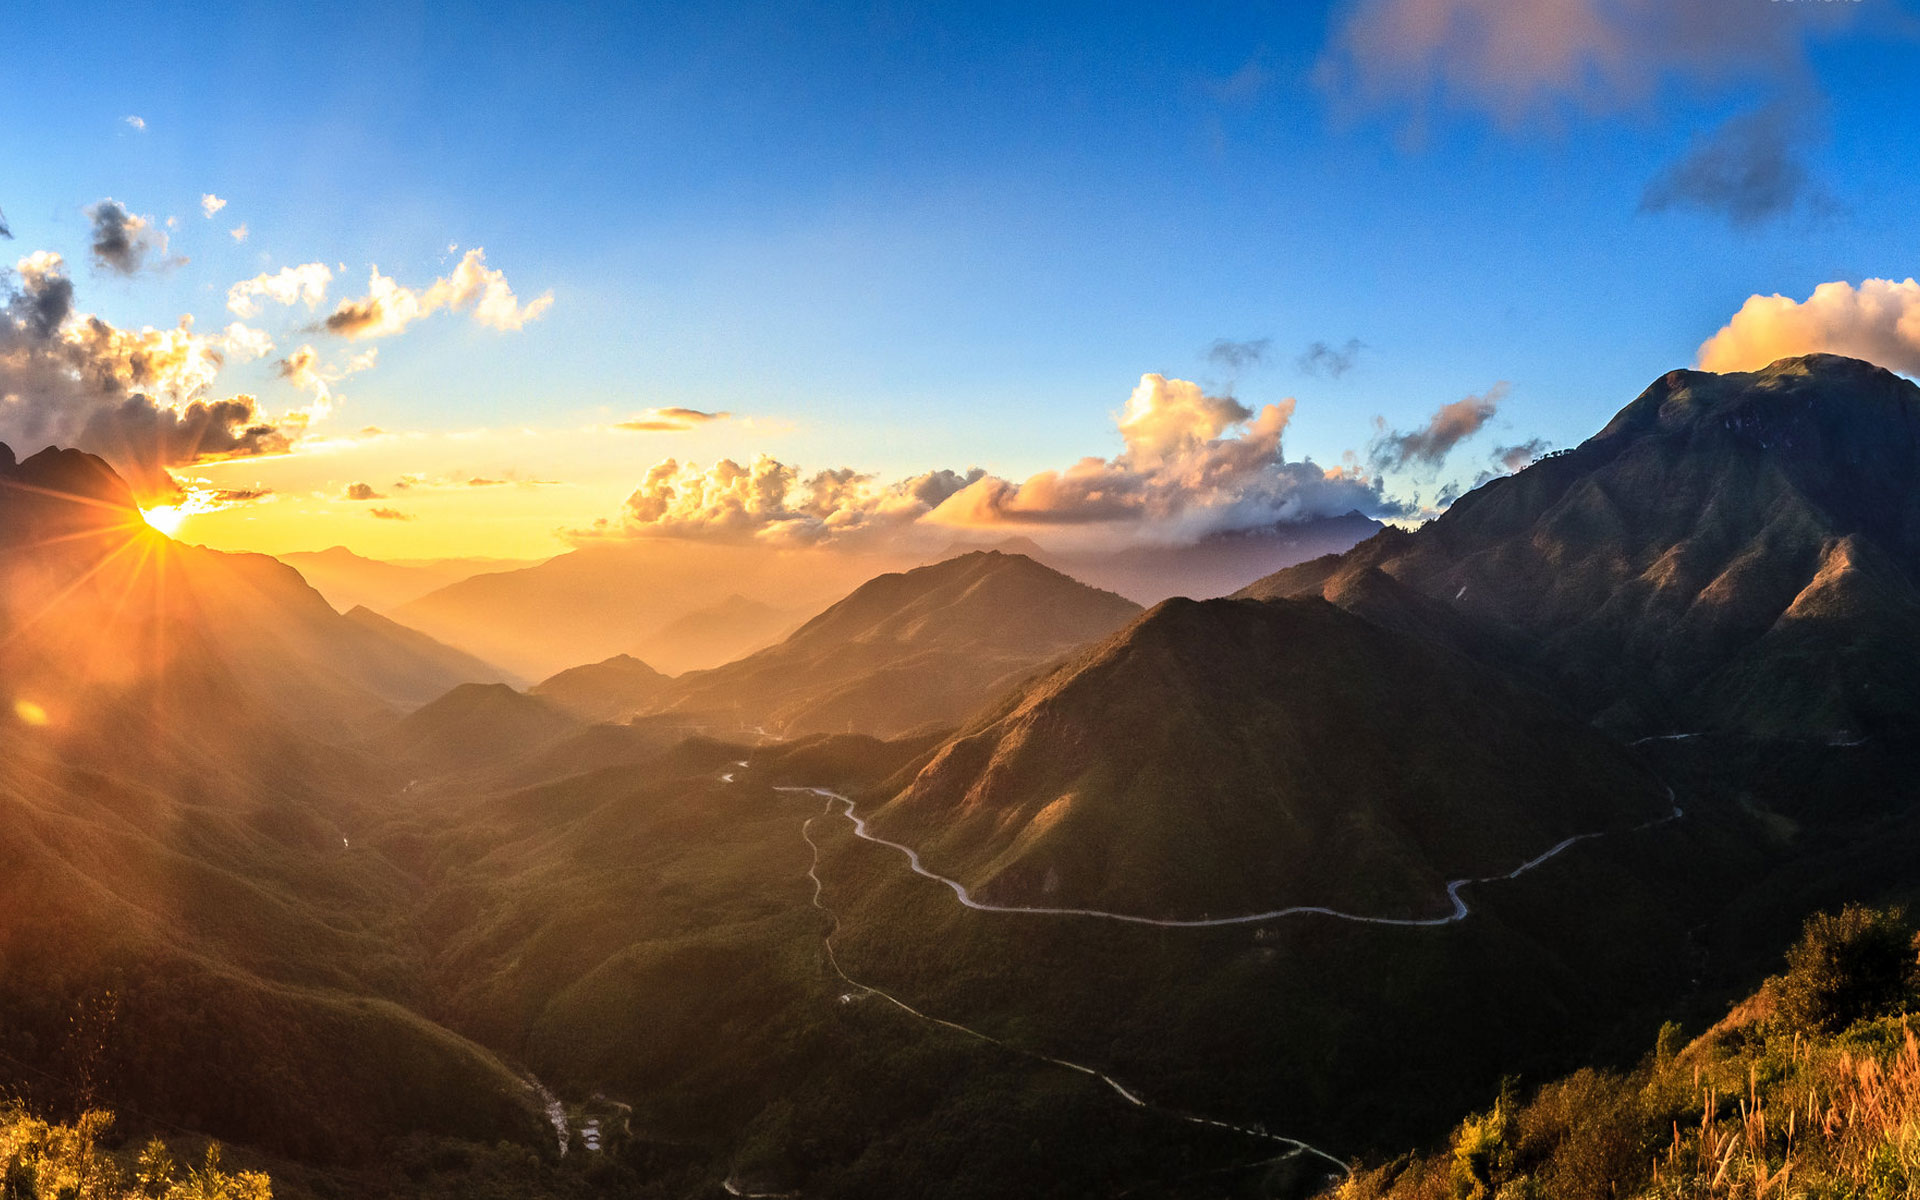 O Quy Ho – Tram Ton Pass, one of the best mountain passes in vietnam